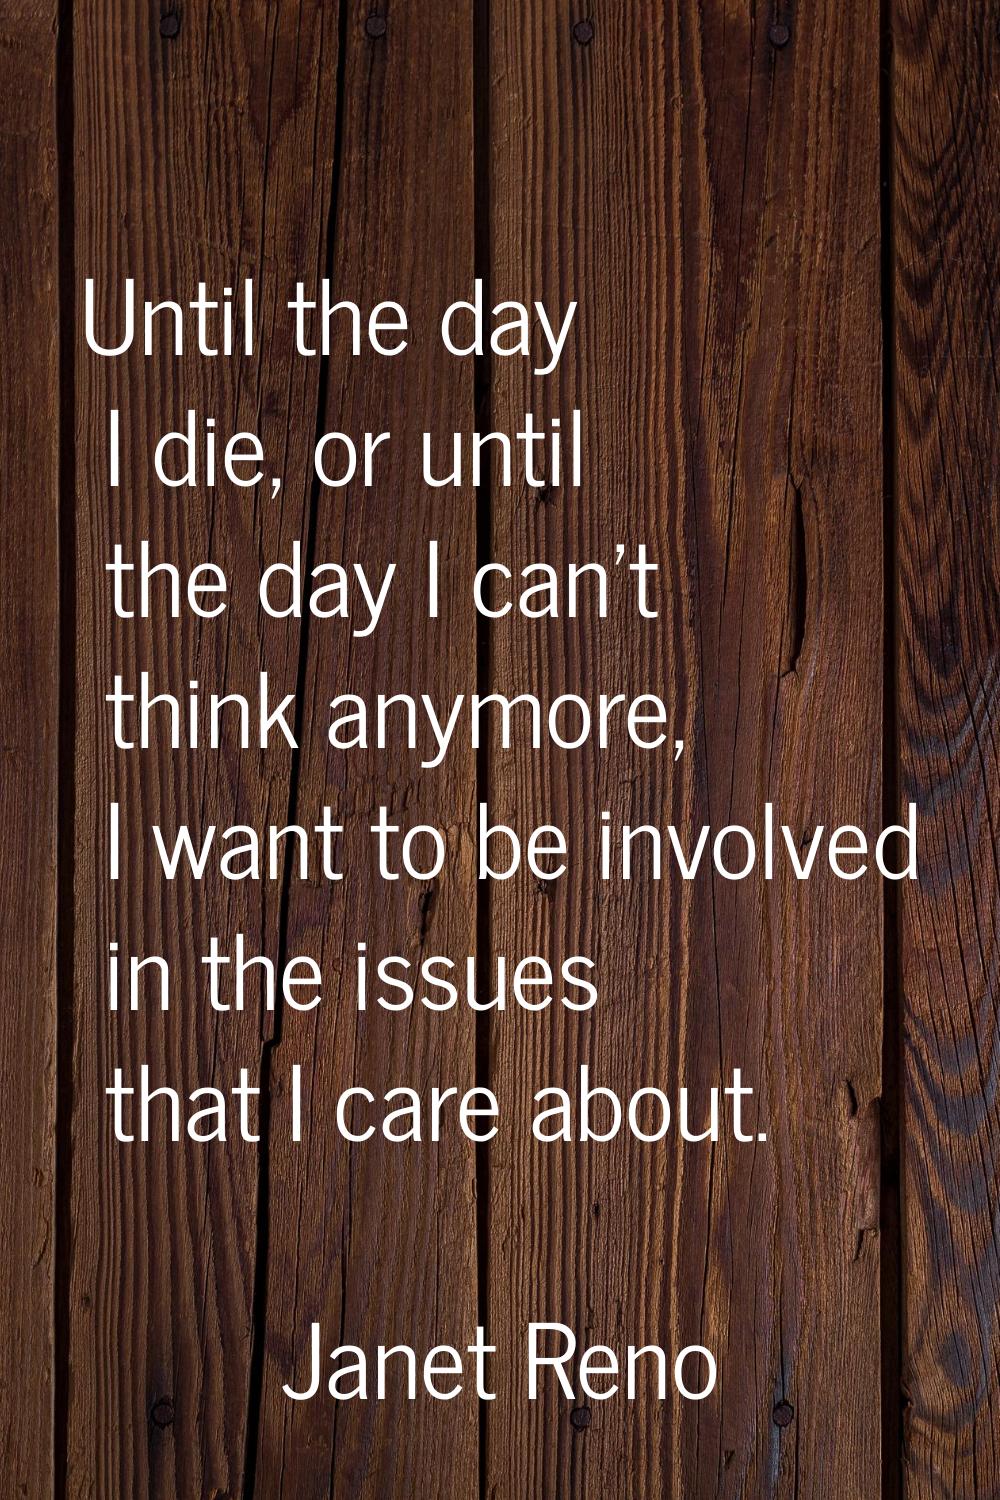 Until the day I die, or until the day I can't think anymore, I want to be involved in the issues th